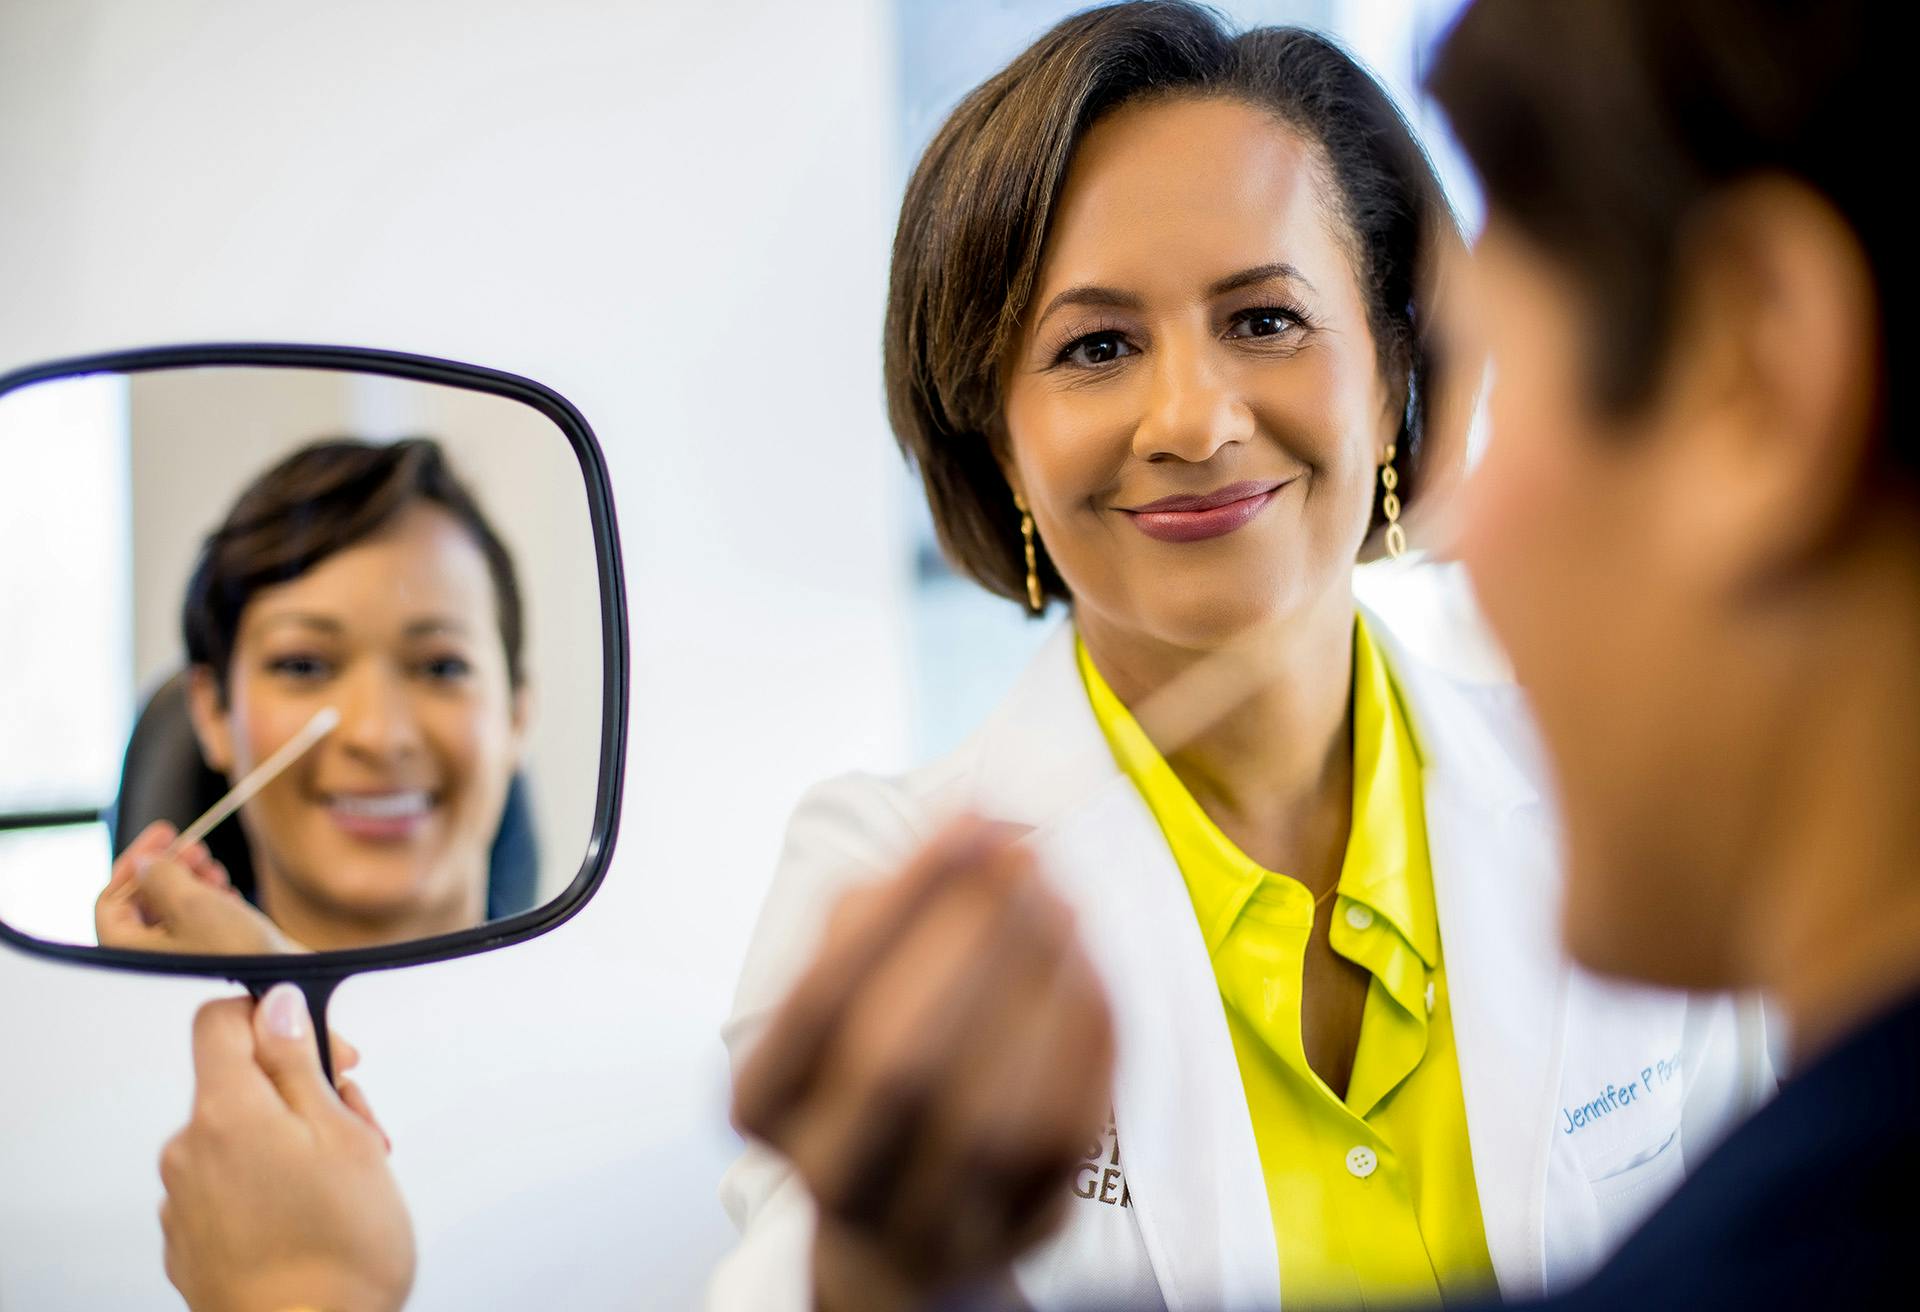 Patient looking at their Facial Plastic Surgery Results in the Mirror